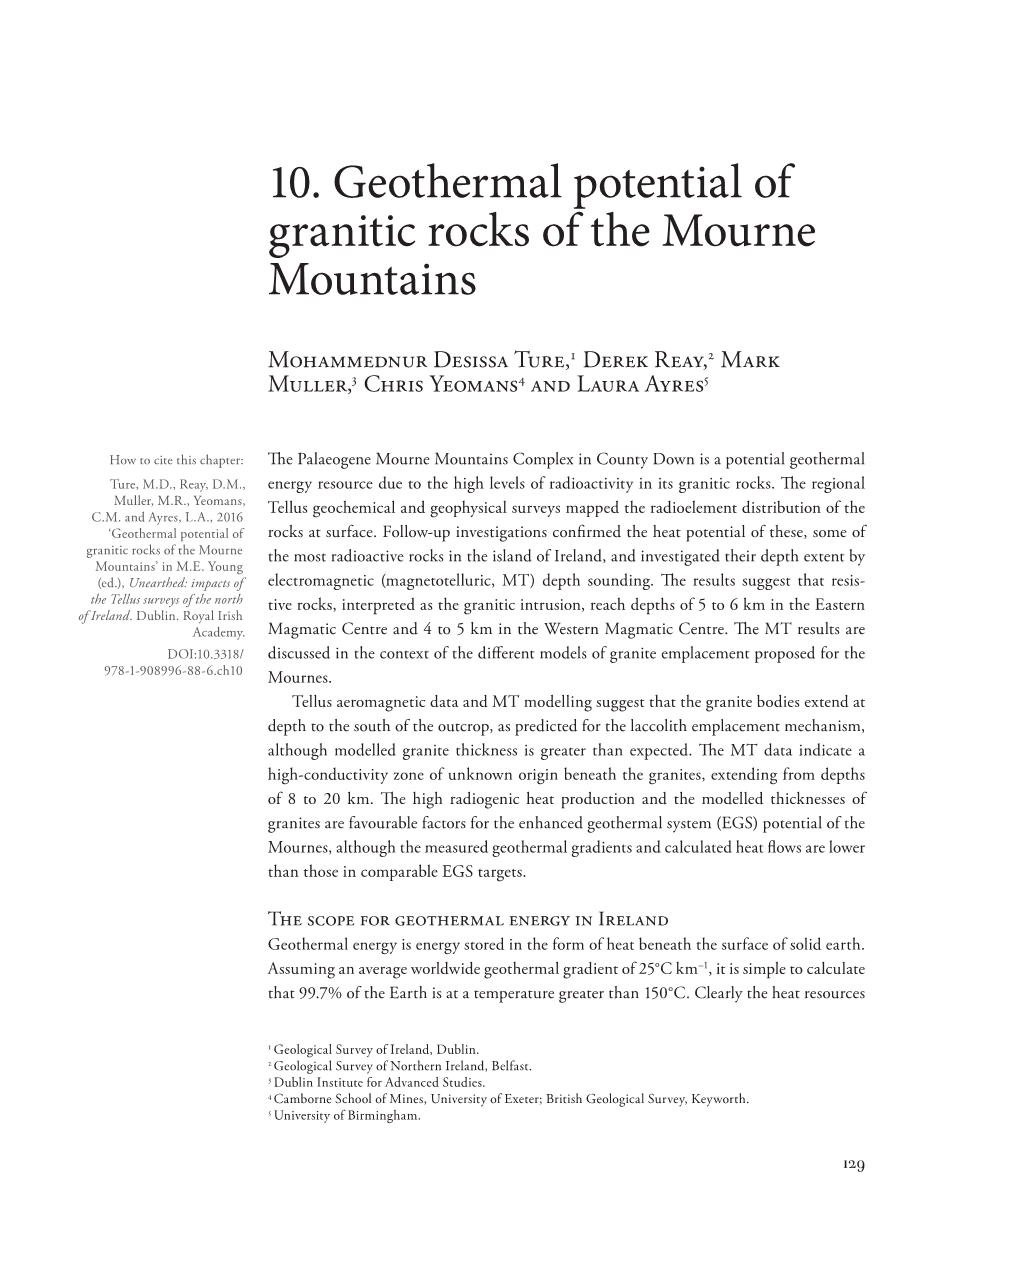 10. Geothermal Potential of Granitic Rocks of the Mourne Mountains